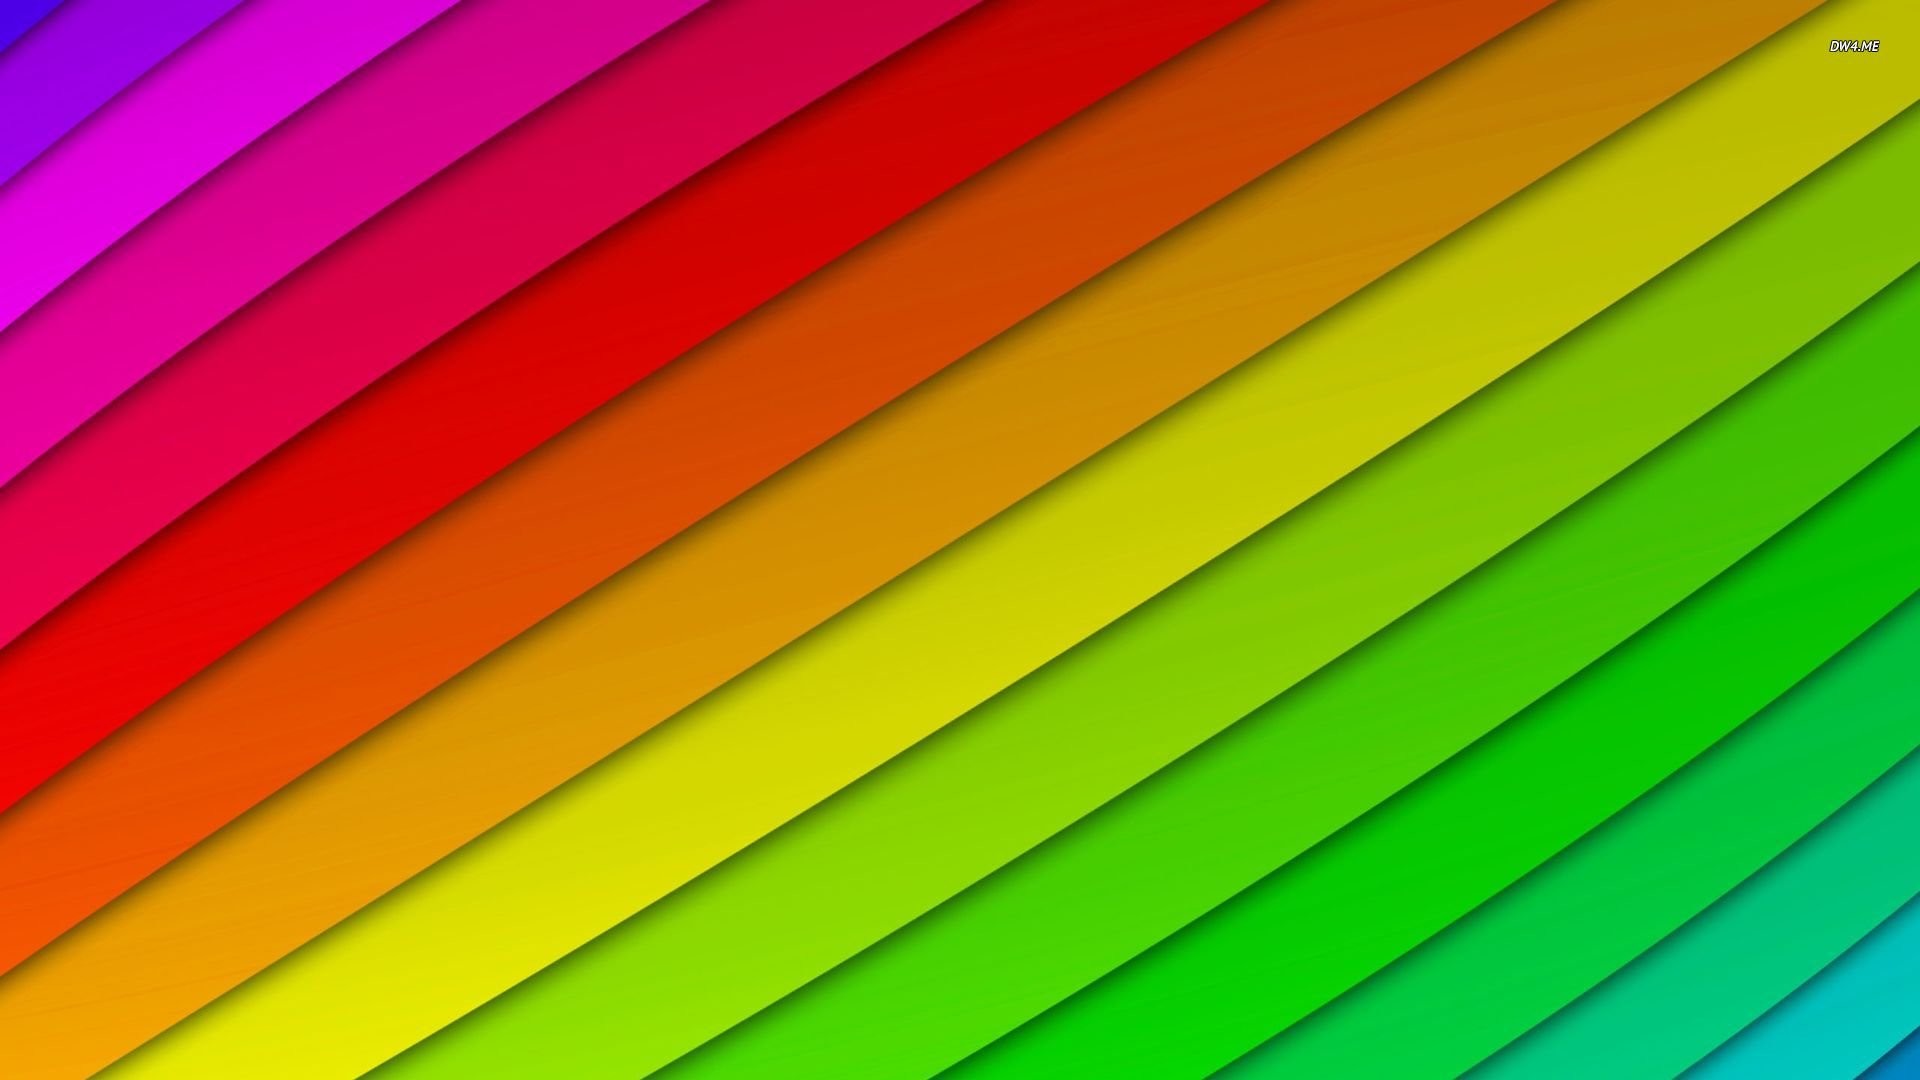 1920x1080 Colored Curved Lines 343047